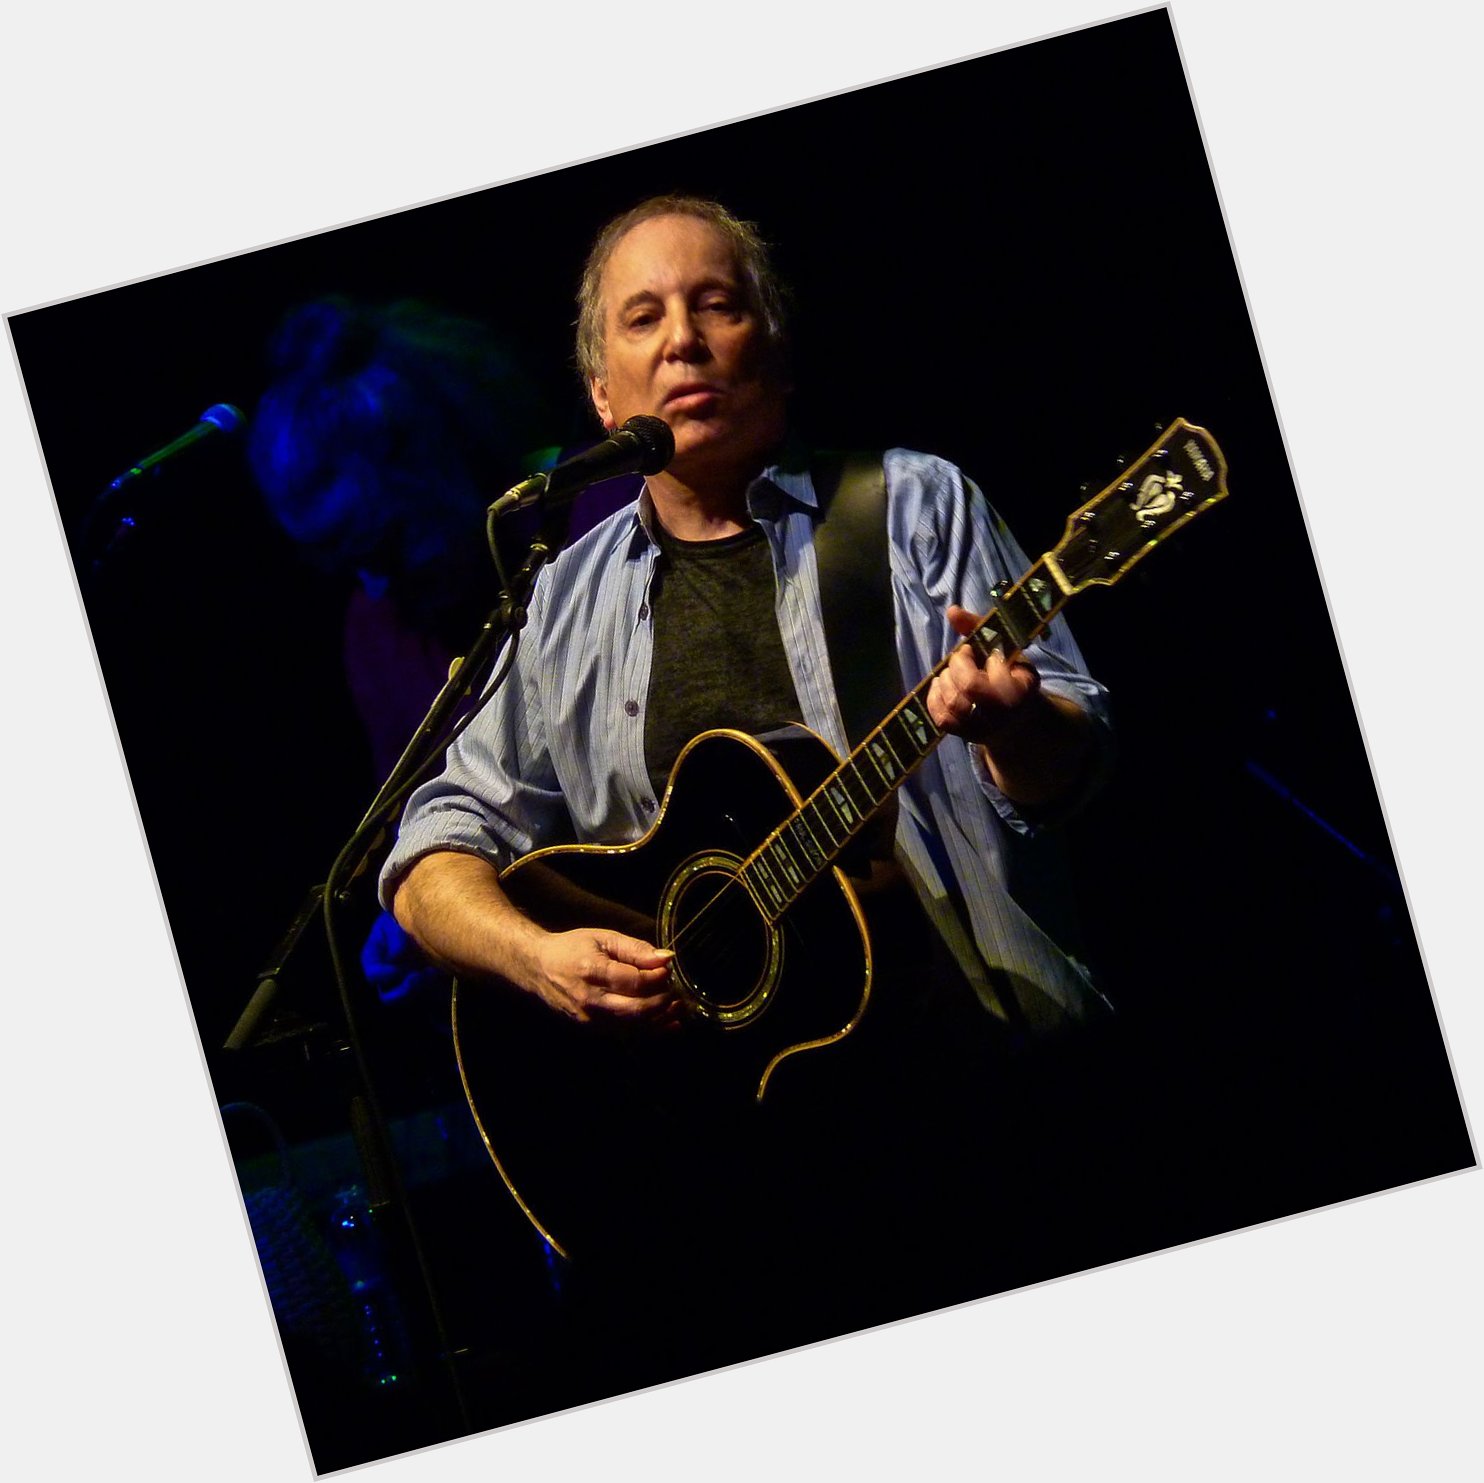 One of the greatest songwriters was born today in 1941. Happy birthday Paul Simon! 